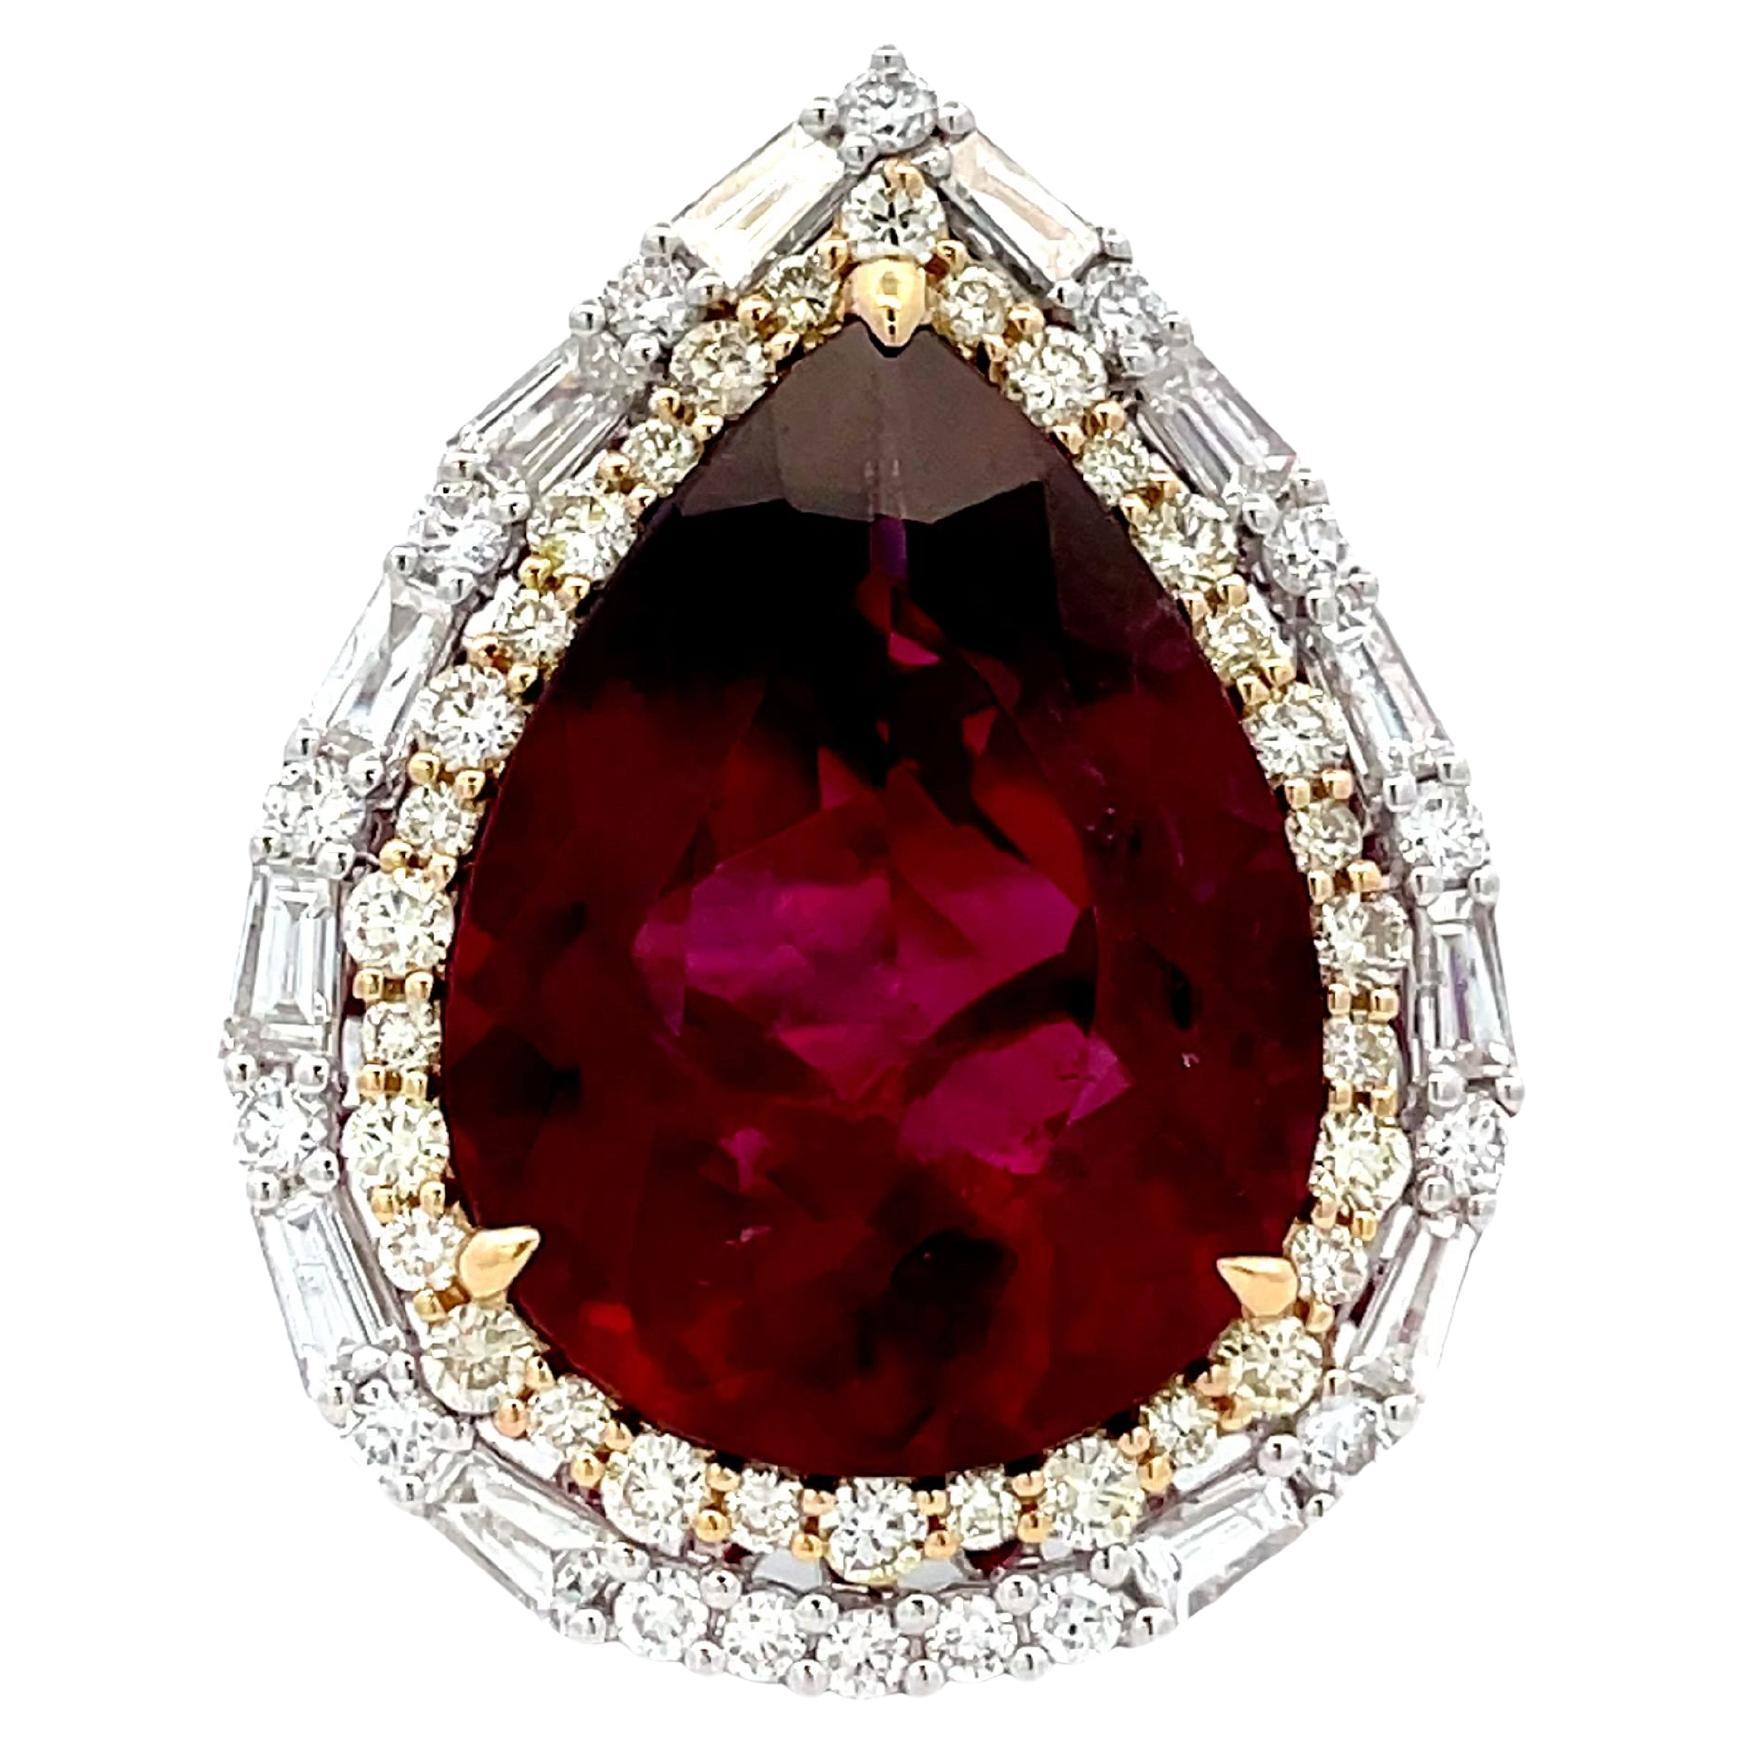 Red Tourmaline Pear 10.65 CT. White Diamond (MIX SHAPE) 0.71 CT 18KY/W RING  For Sale